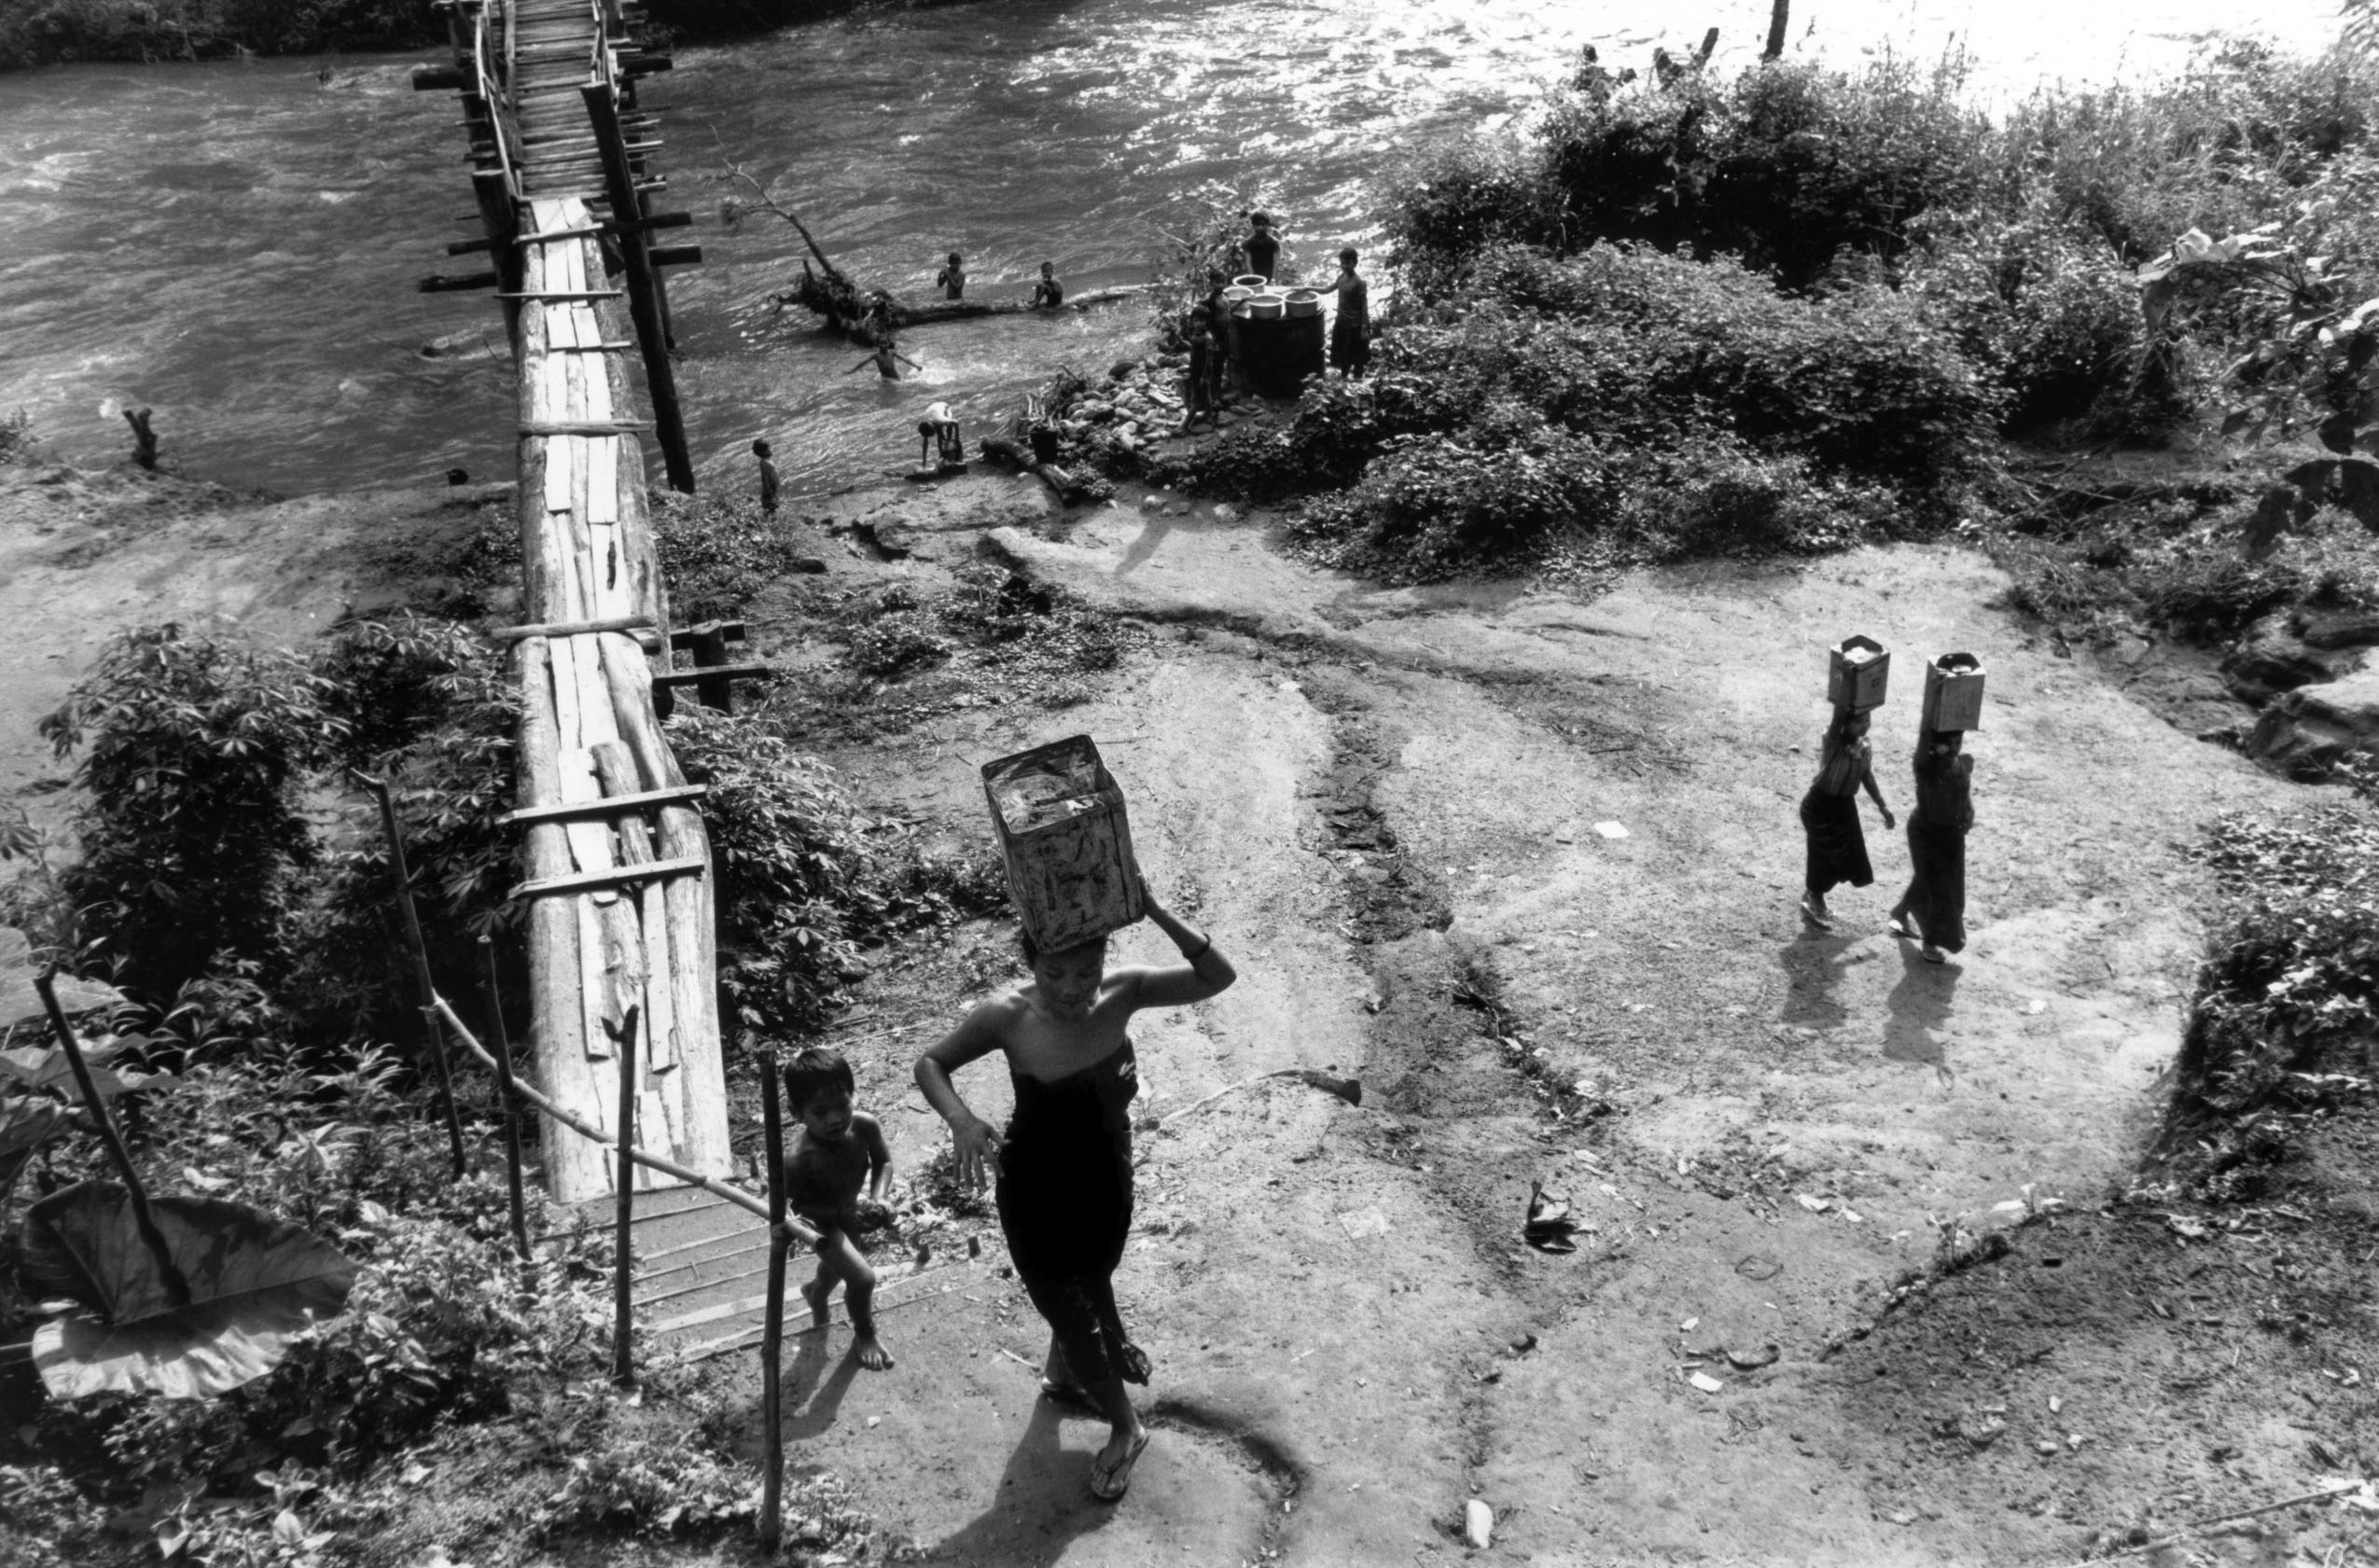 People carry water in jerrycans on their heads from a nearby river.